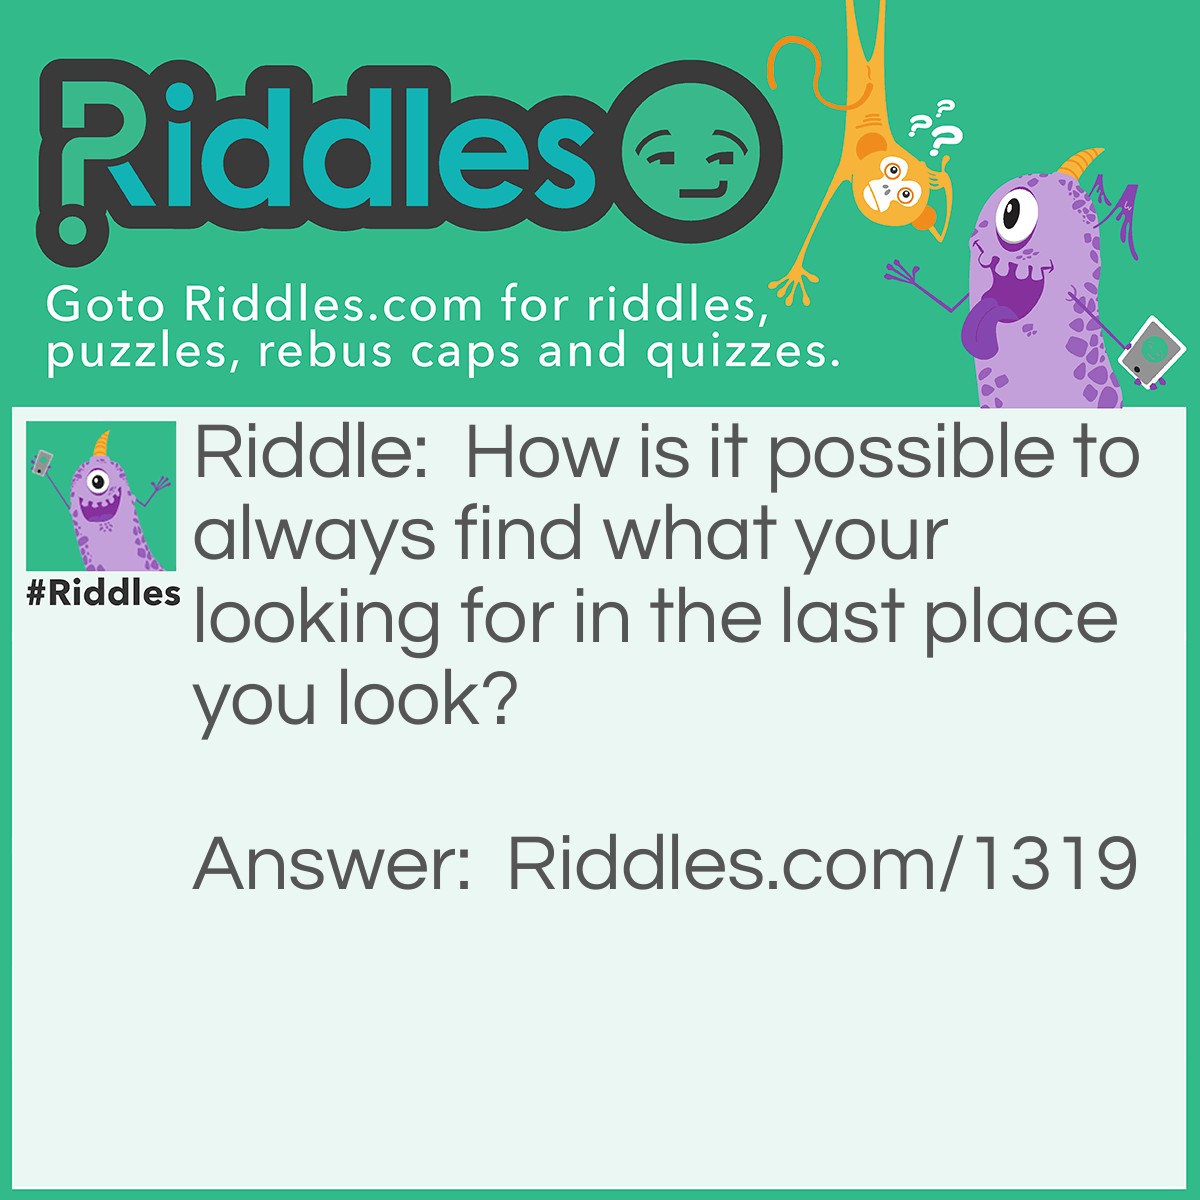 Riddle: How is it possible to always find what your looking for in the last place you look? Answer: If you find what your are looking for then you would stop looking so it would be in the last place you look.